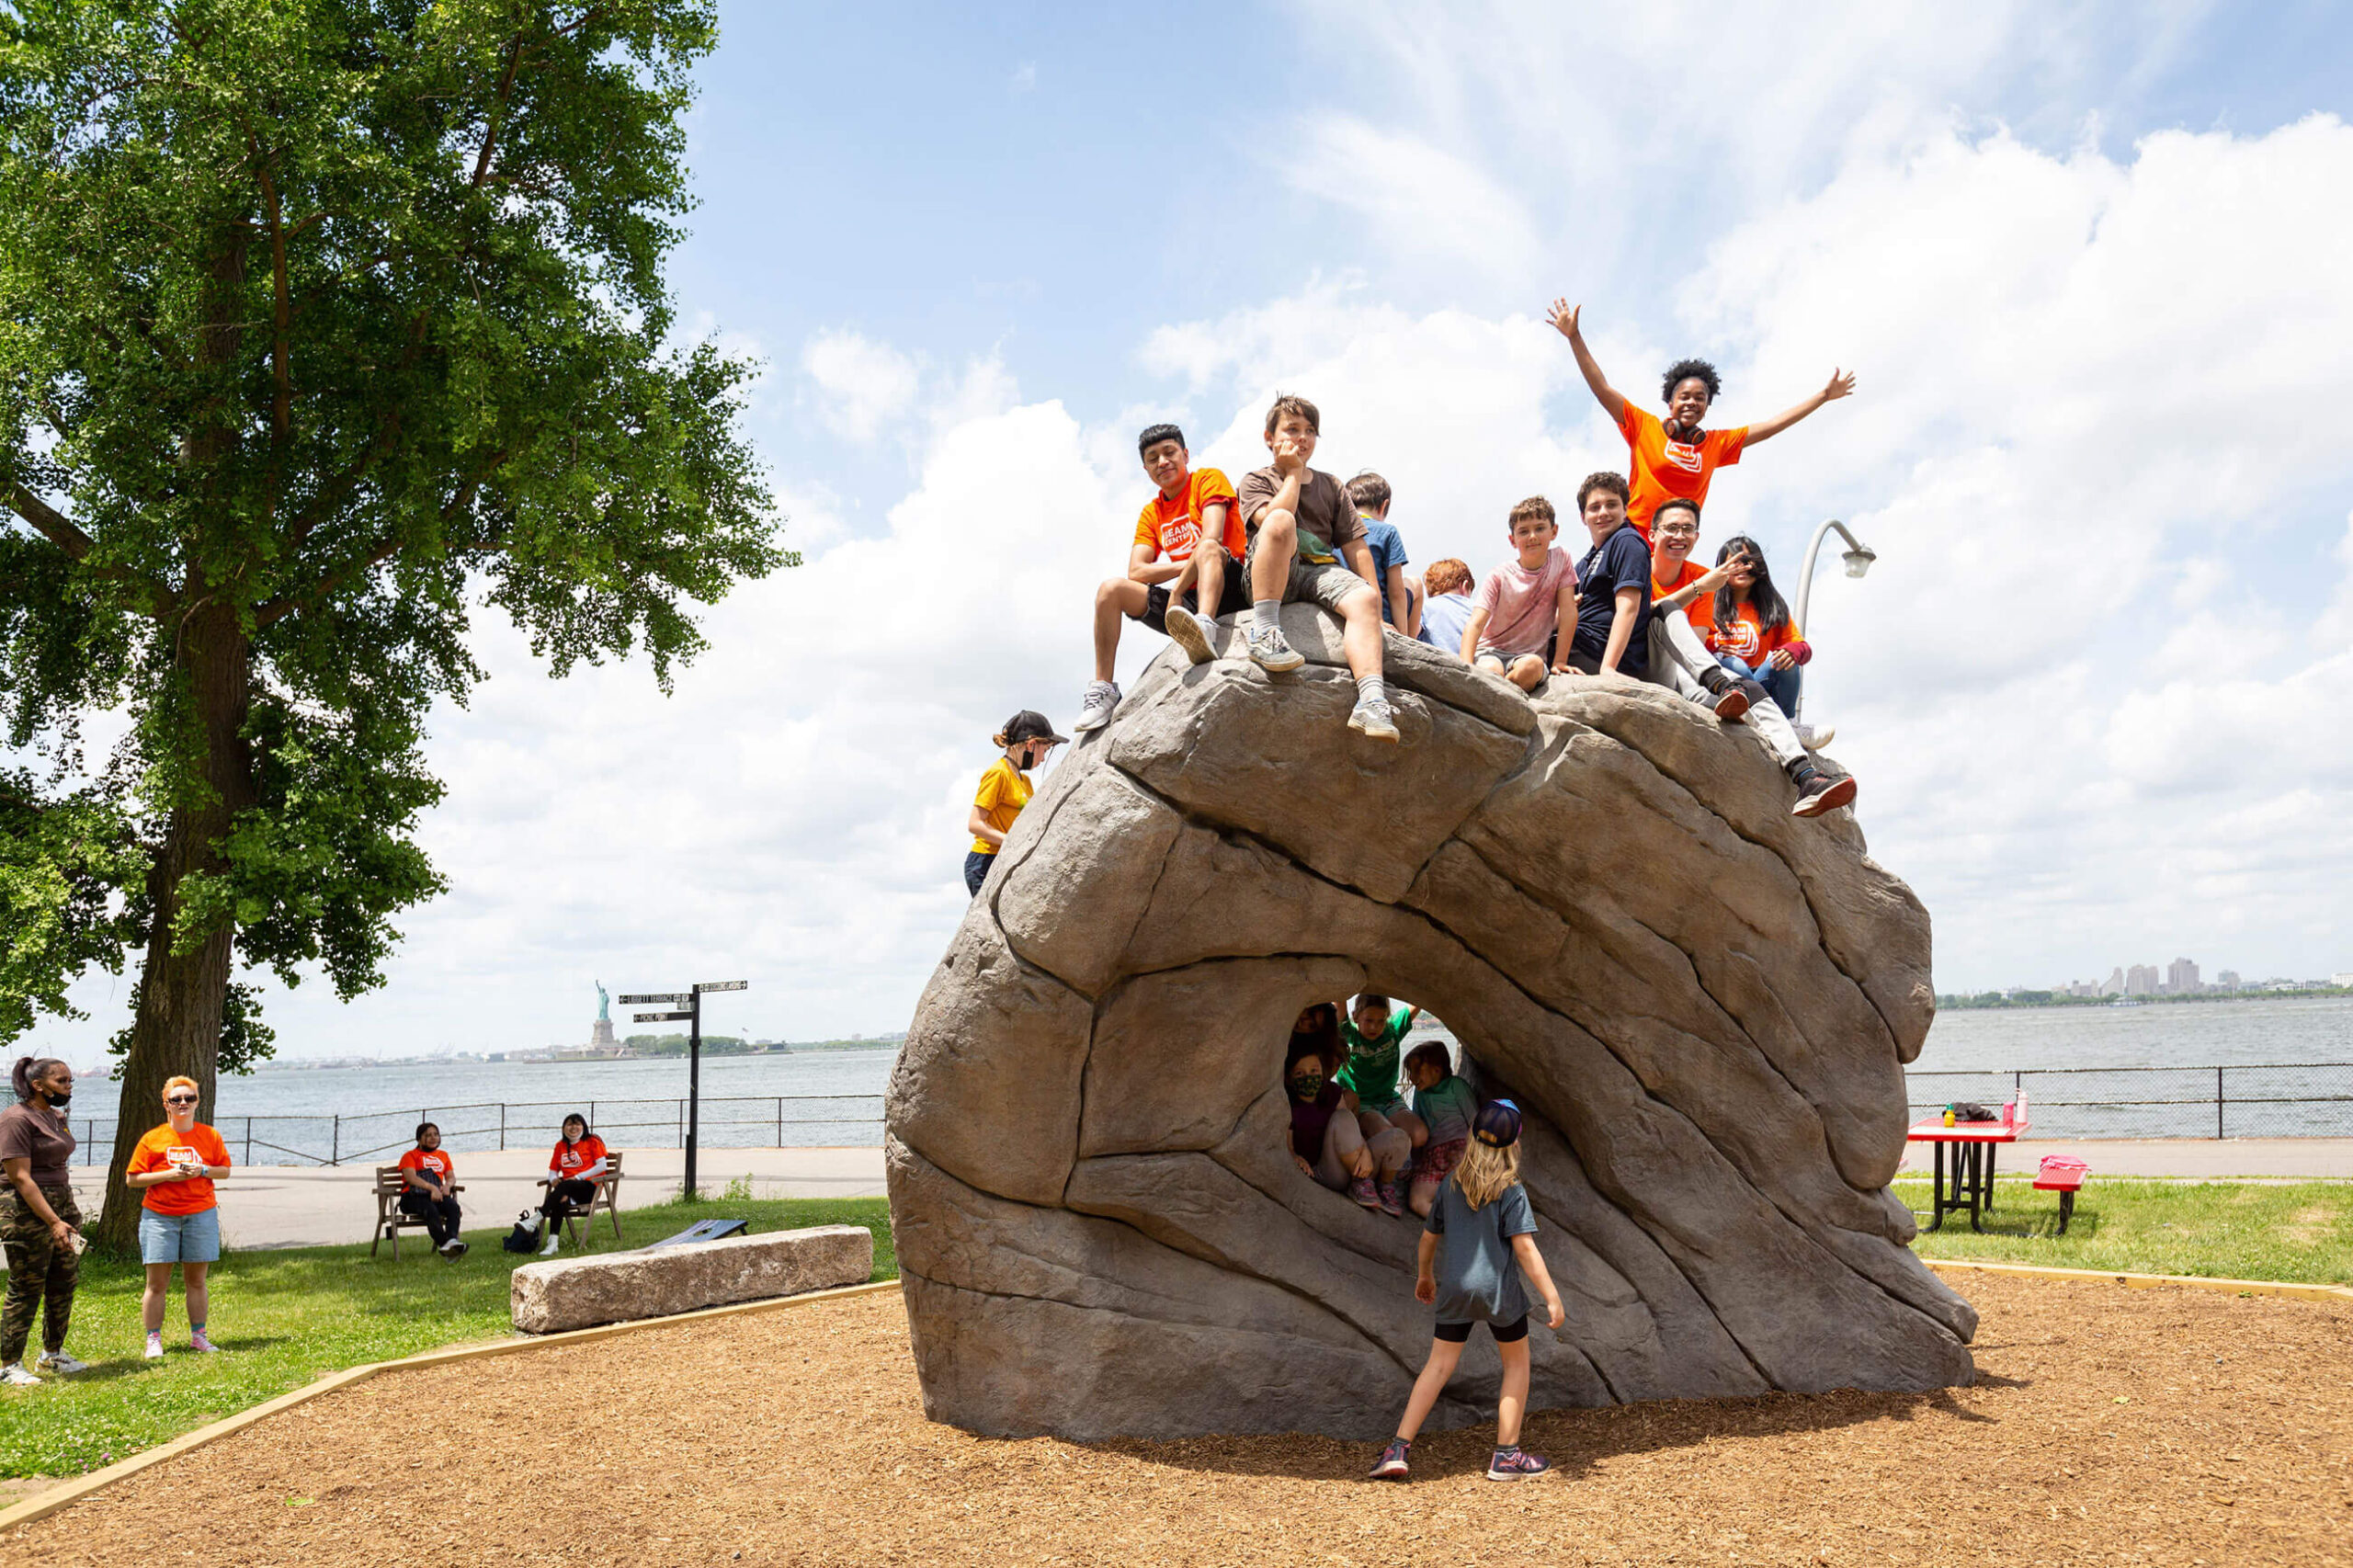 More than a dozen kids climbing and playing on a large donut-shaped rock and climbing structure at the Governors Island in New York.